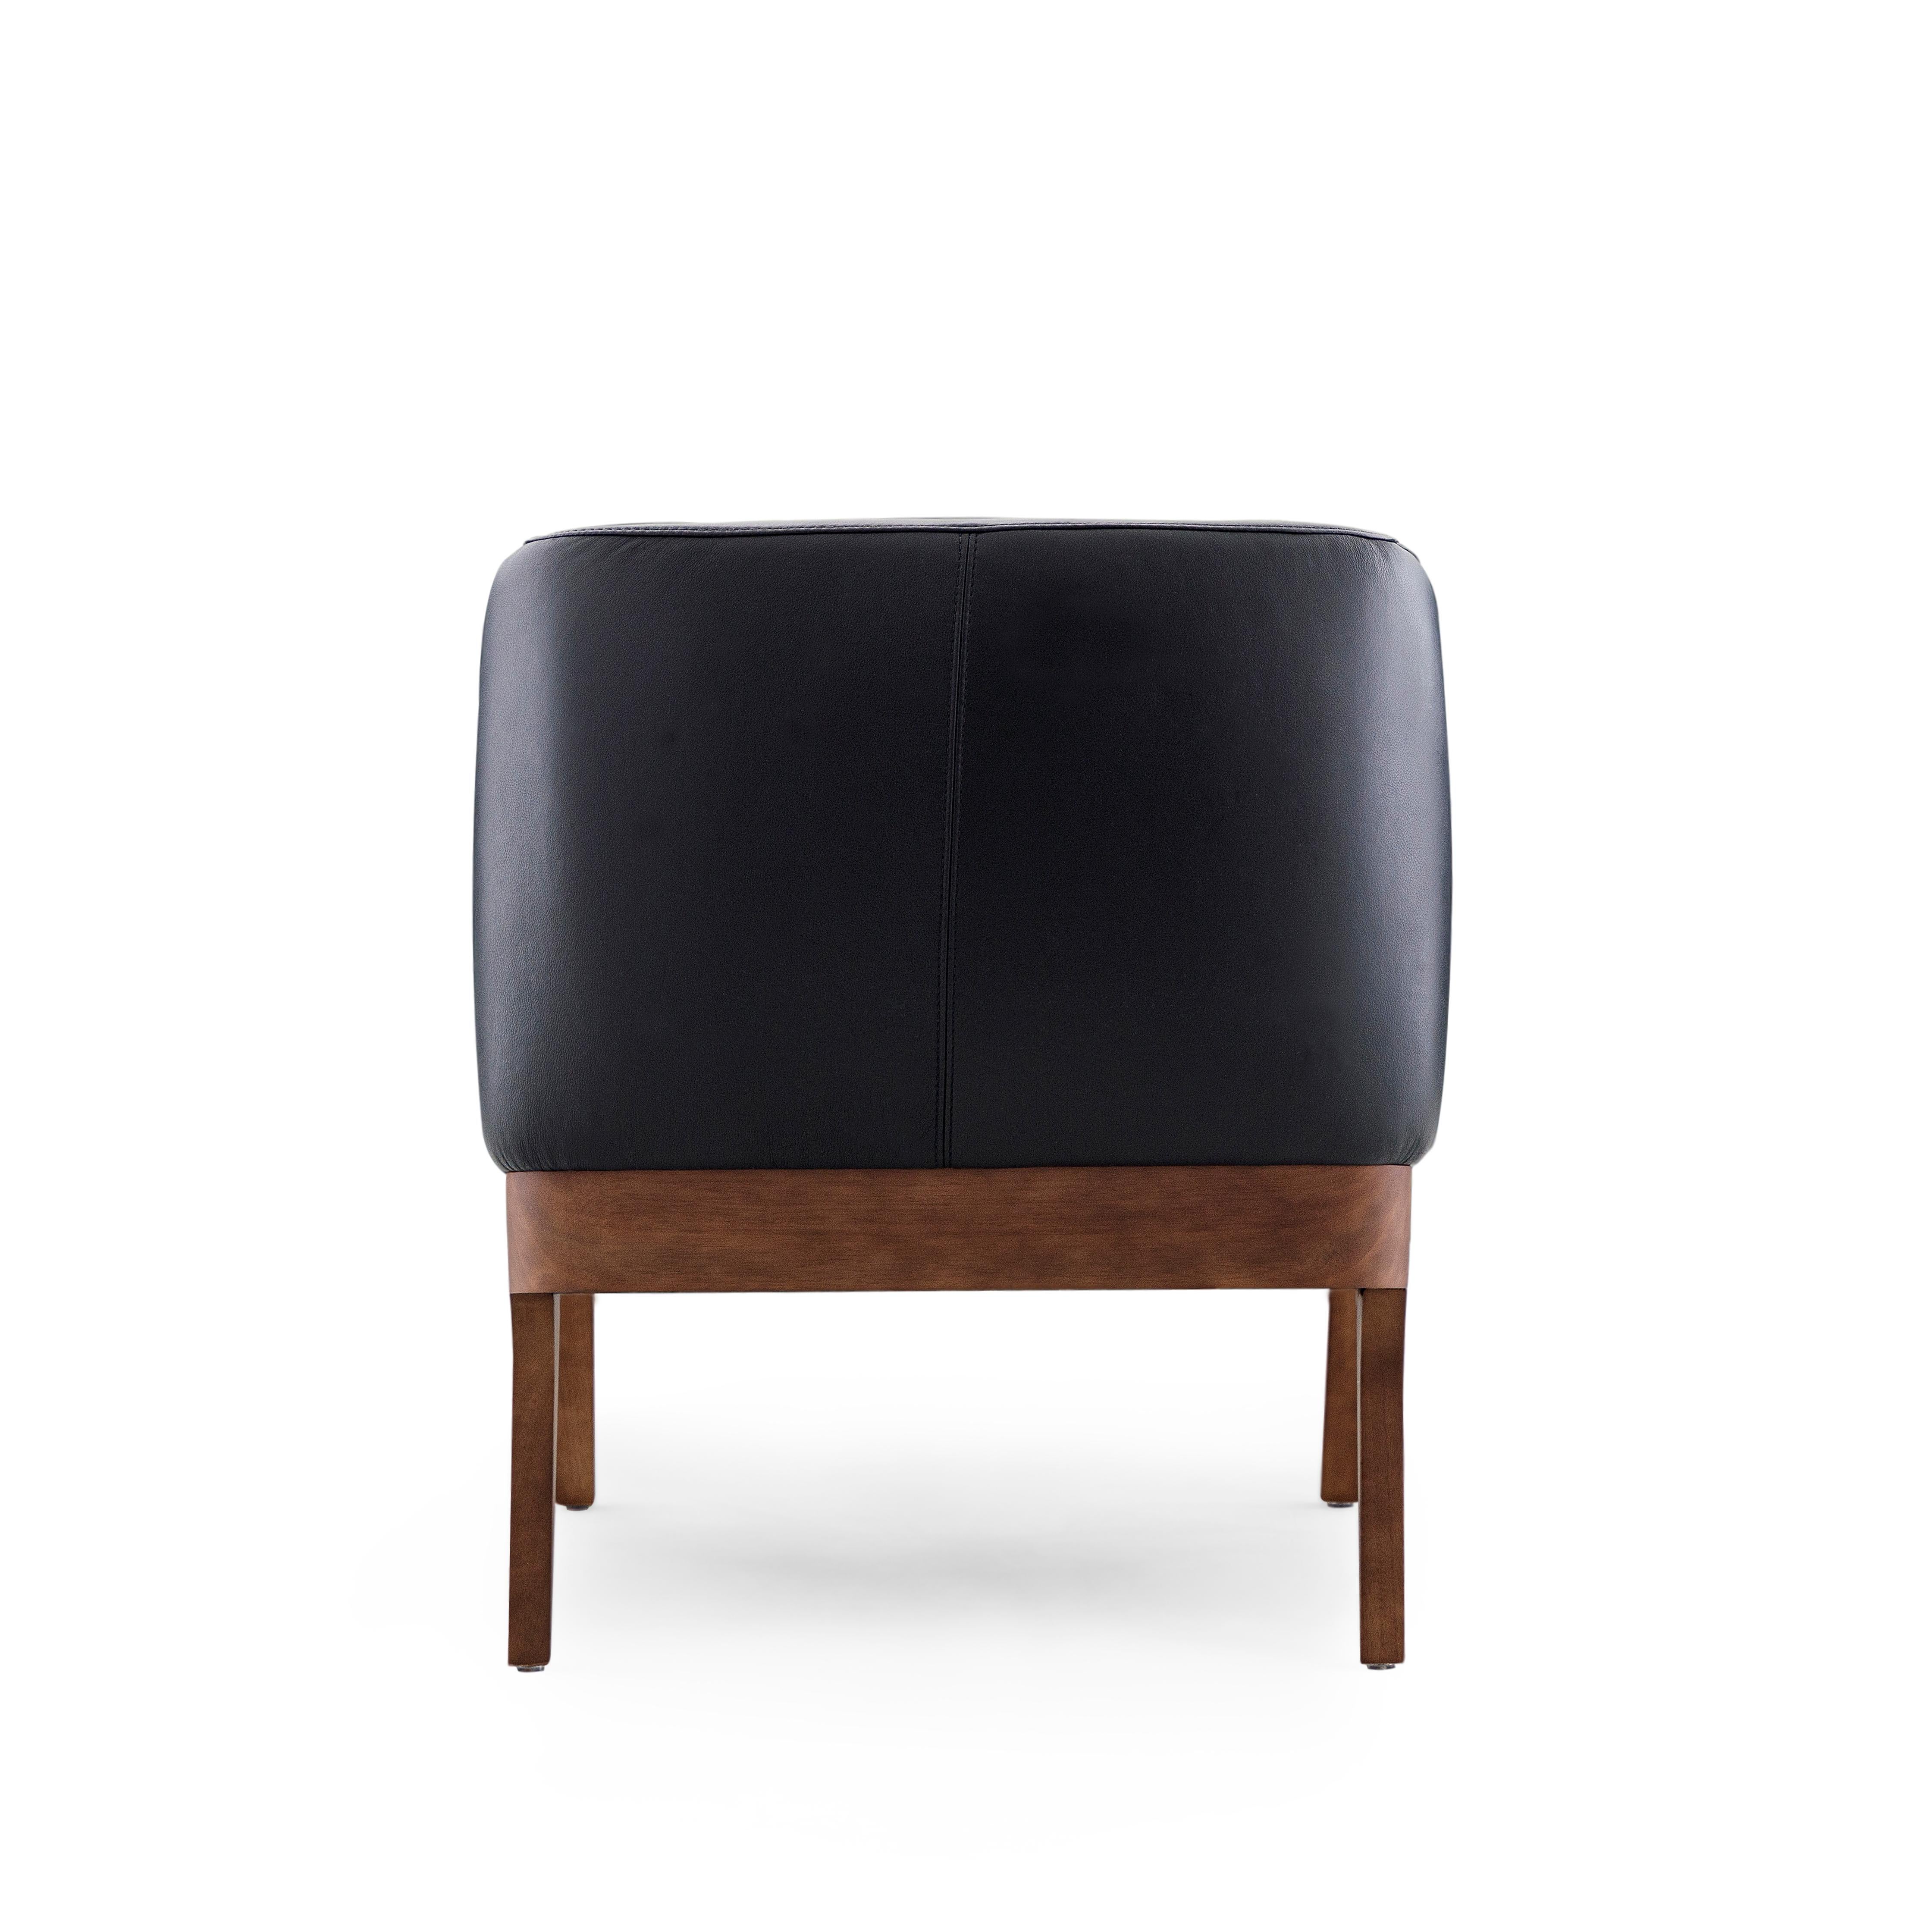 Abra Armchair in Black Leather and Walnut Wood Finish In New Condition For Sale In Miami, FL